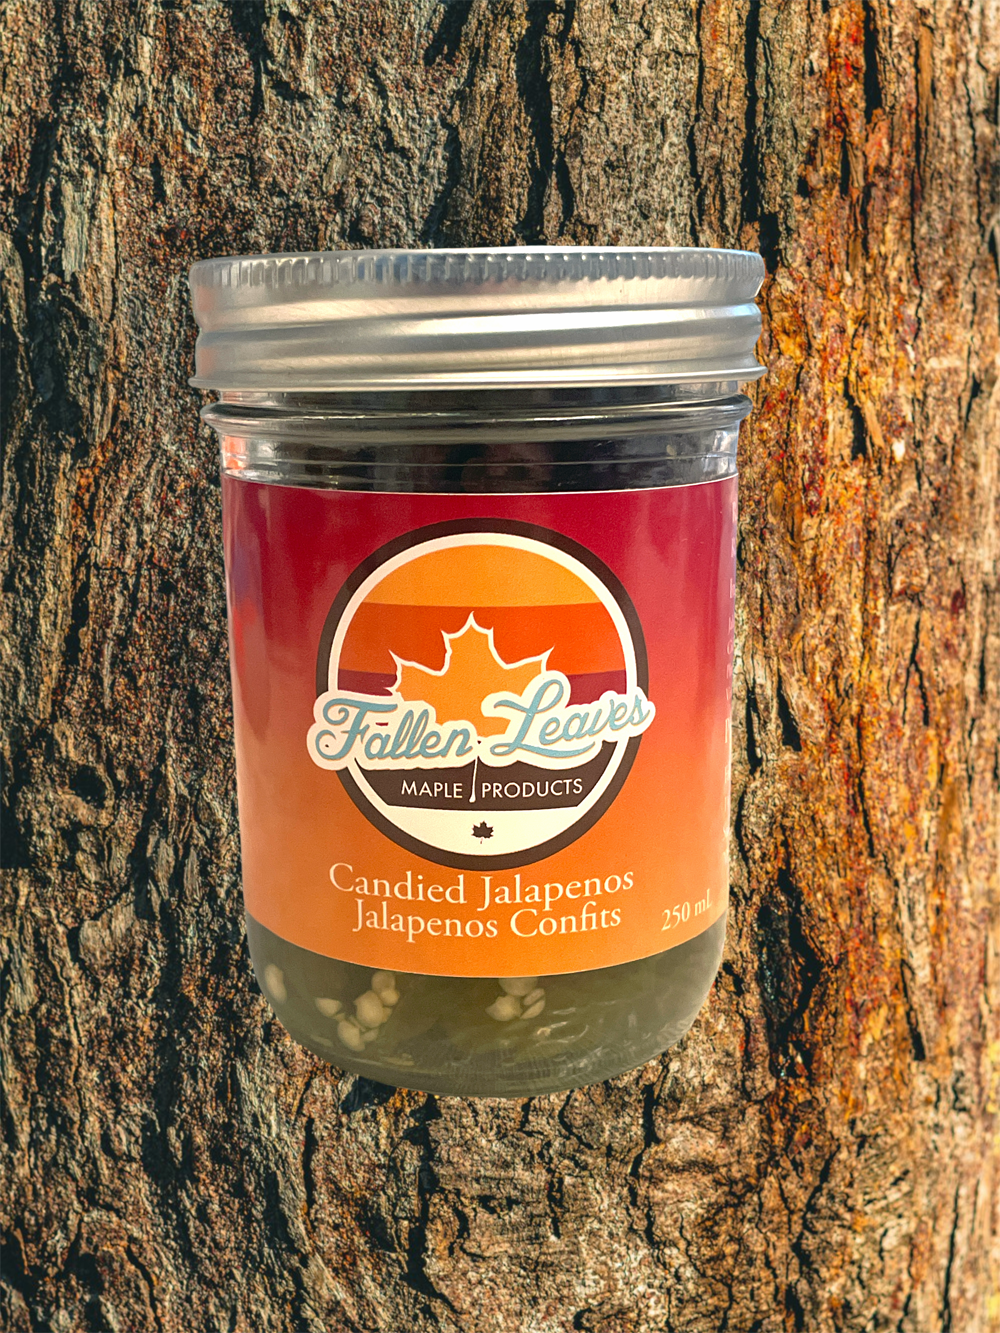 Candied Jalapeños Fallen Leaves Maple Products